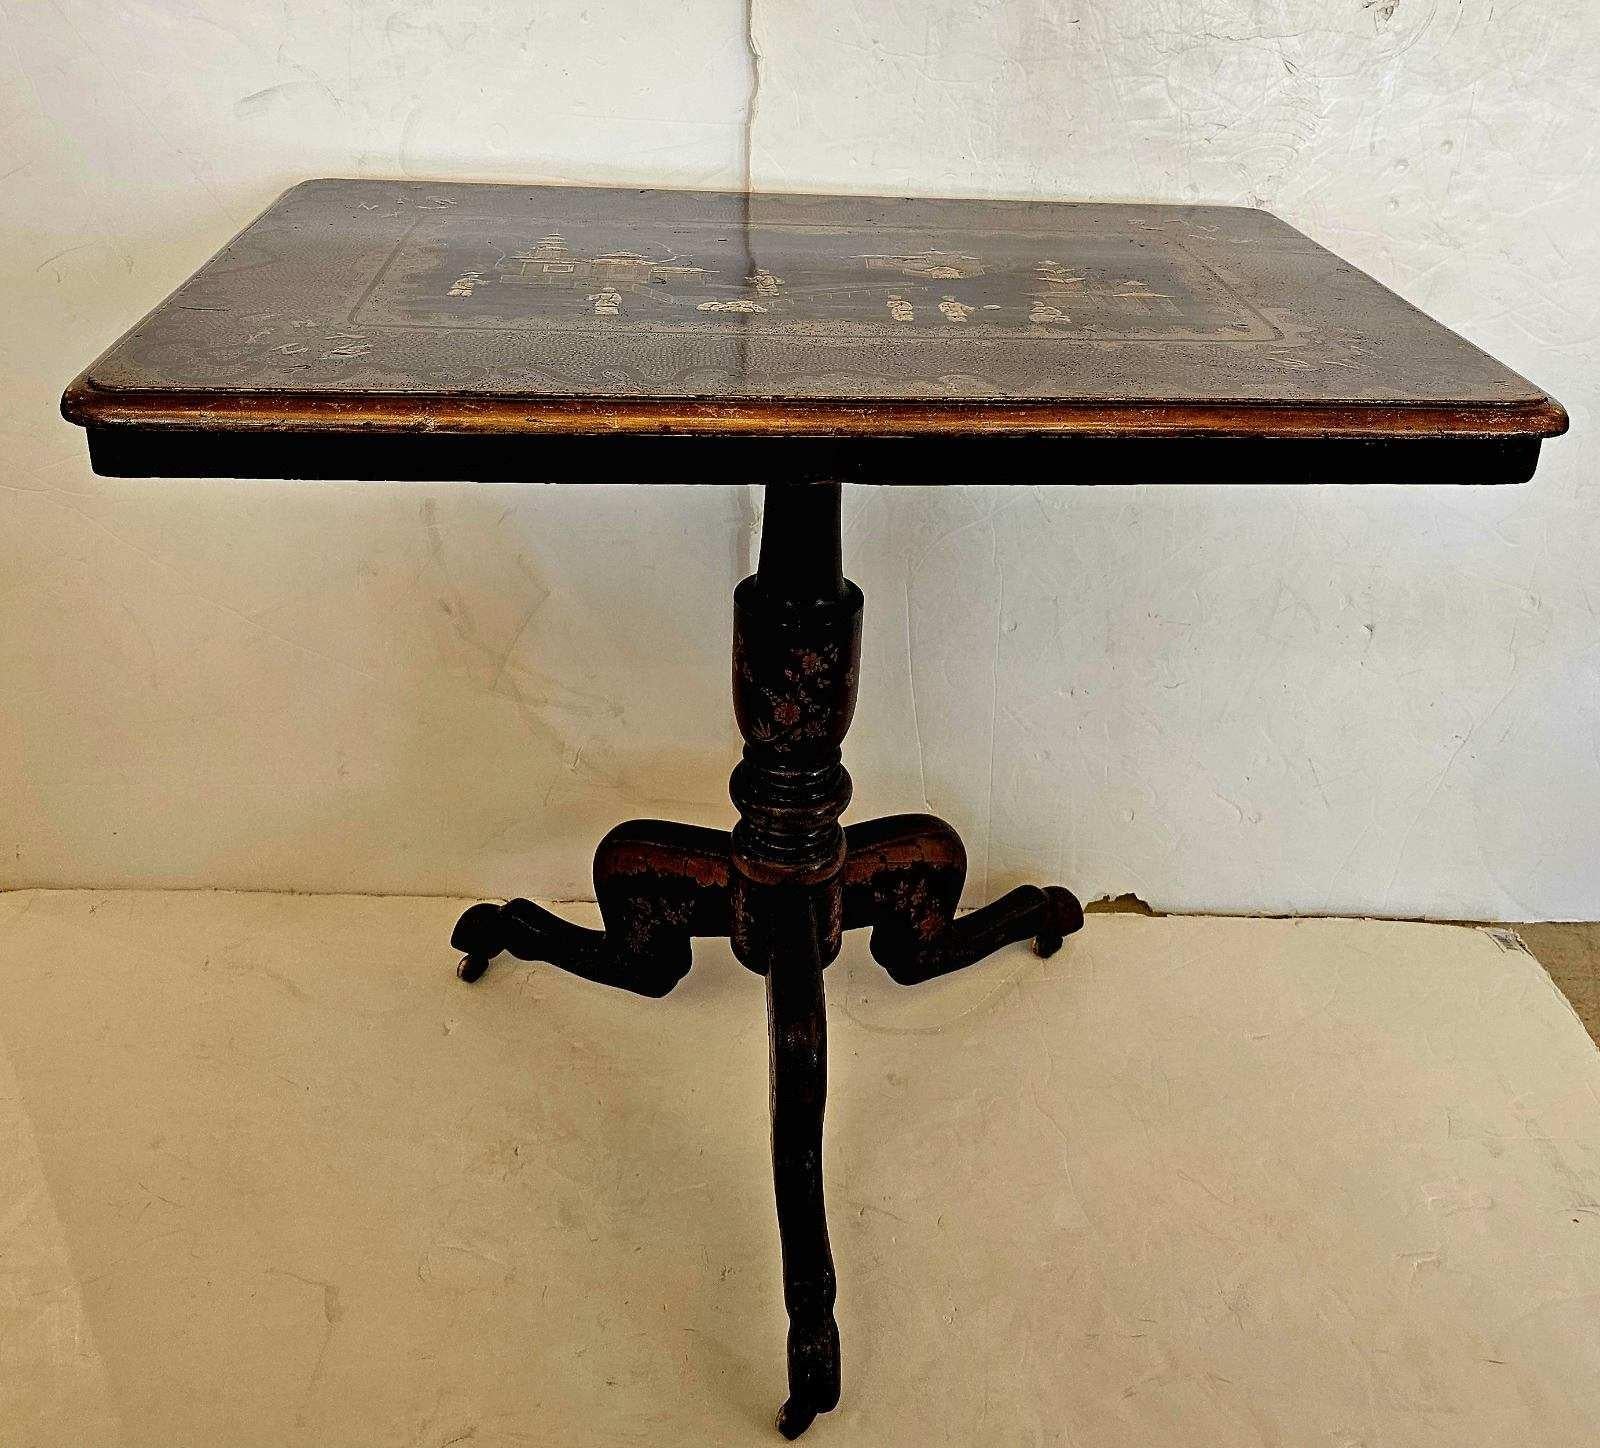 Mid 19th century beautiful Chinese Export chinoiserie tilt top table. Tripod base on original castors. Meticulously detailed decoration with pagoda and figures.
